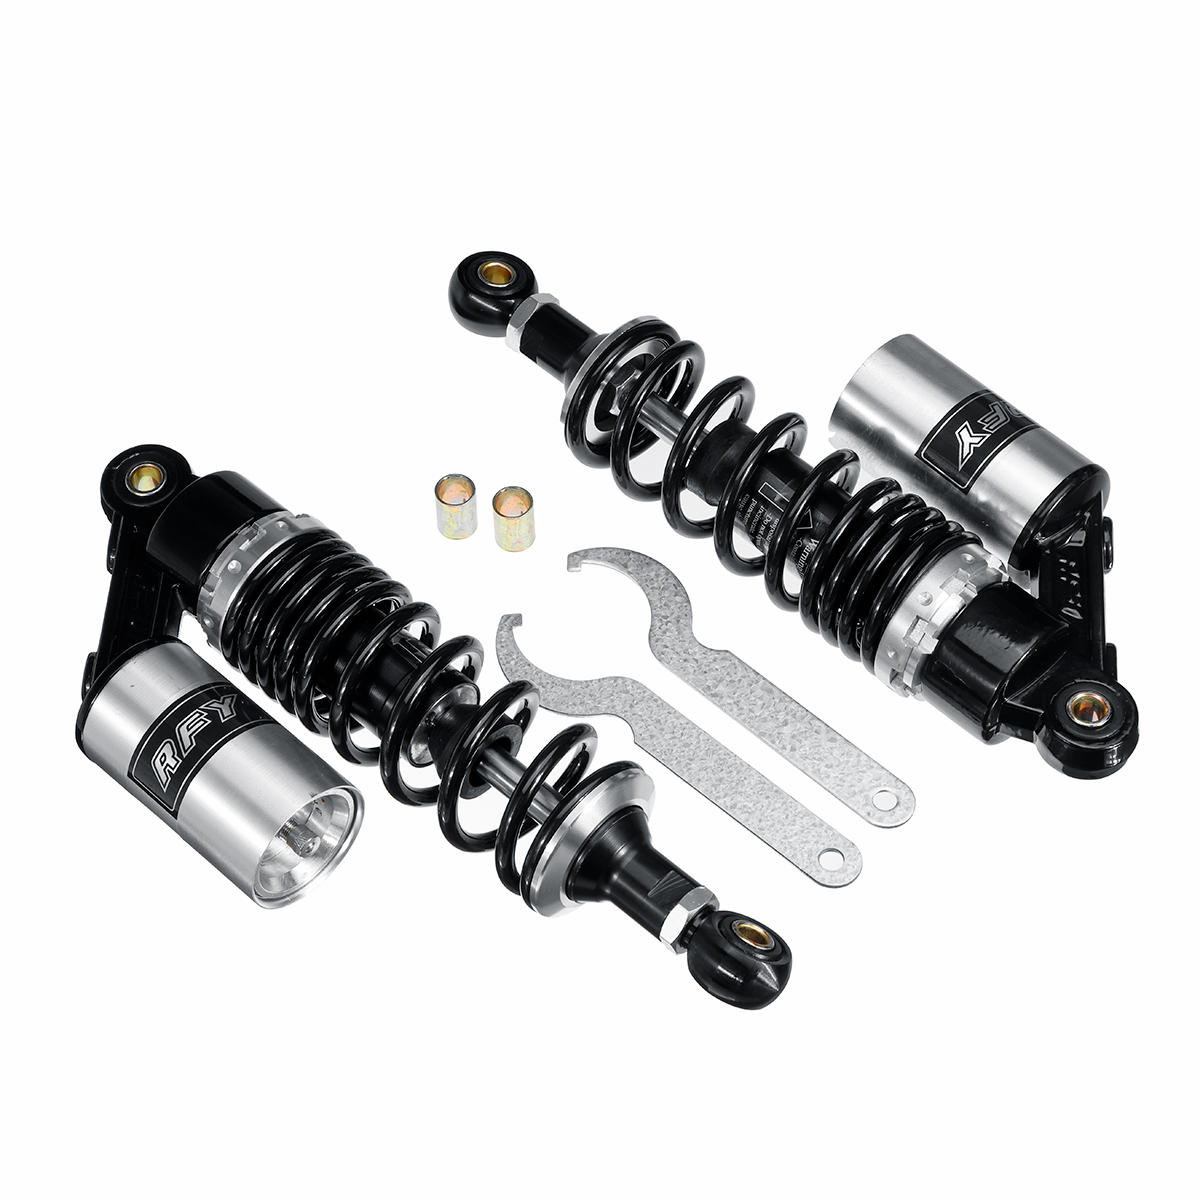 Image of Pair Round Hole 400mm 1575" Motorcycle Rear Air Shock Absorber Suspension Scooter ATV RFY